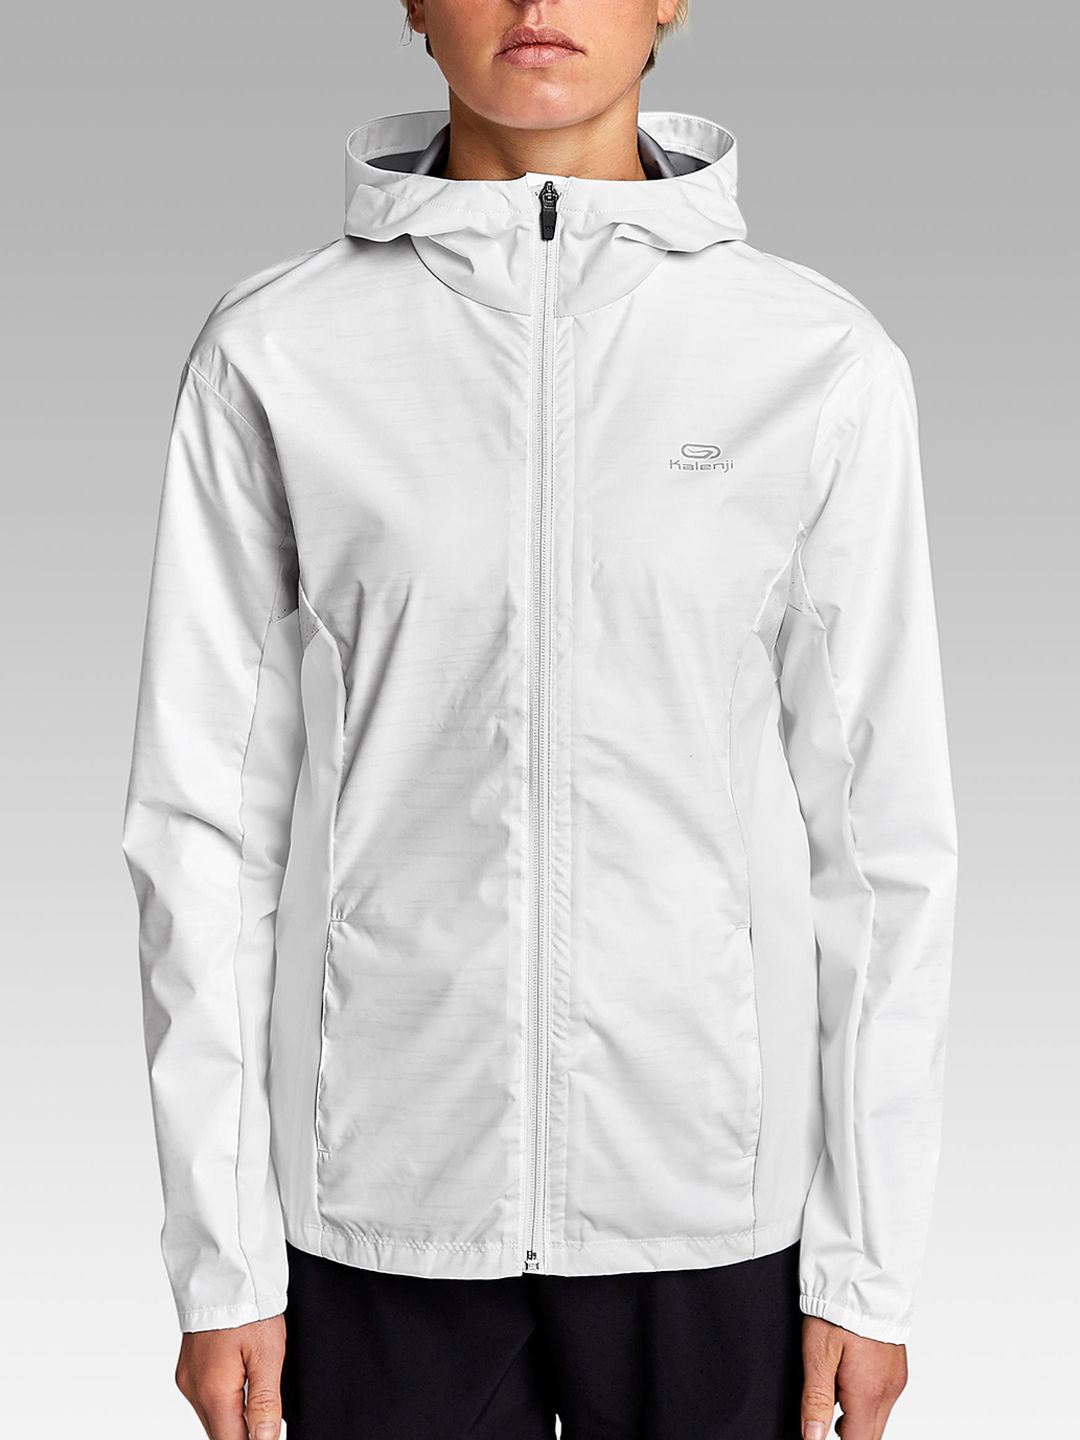 Kalenji By Decathlon Women White Solid Windcheater and Water